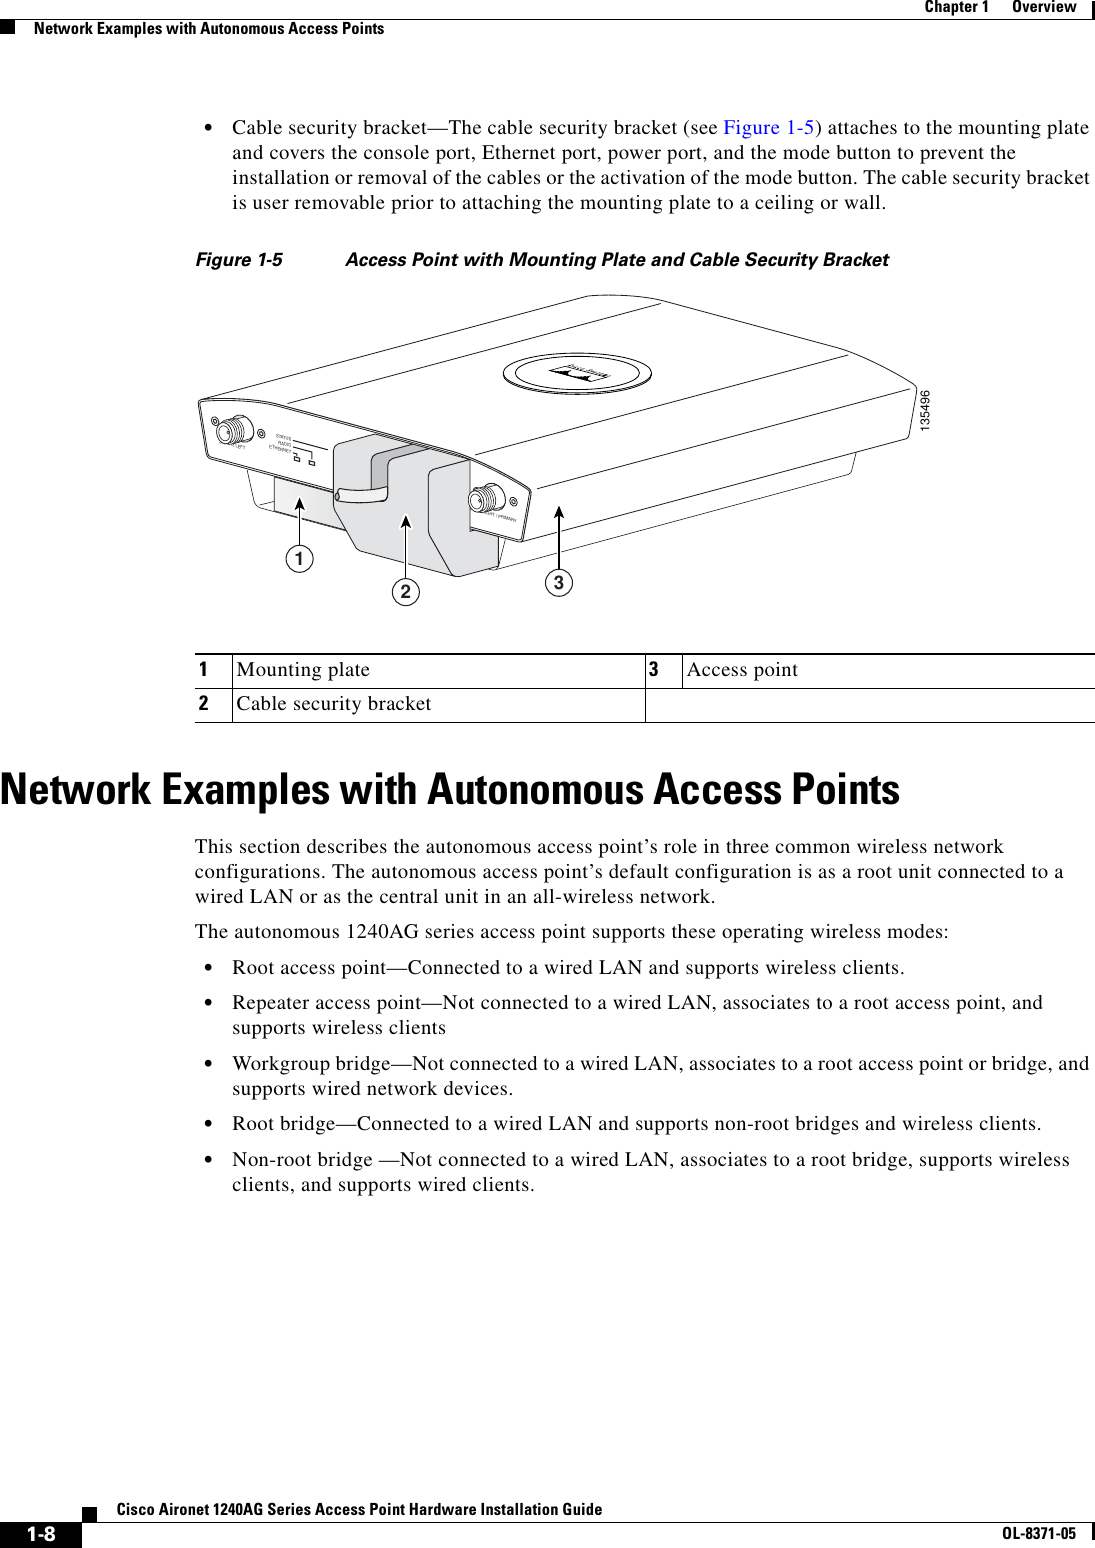  1-8Cisco Aironet 1240AG Series Access Point Hardware Installation GuideOL-8371-05Chapter 1      OverviewNetwork Examples with Autonomous Access Points•Cable security bracket—The cable security bracket (see Figure 1-5) attaches to the mounting plate and covers the console port, Ethernet port, power port, and the mode button to prevent the installation or removal of the cables or the activation of the mode button. The cable security bracket is user removable prior to attaching the mounting plate to a ceiling or wall.Figure 1-5 Access Point with Mounting Plate and Cable Security Bracket Network Examples with Autonomous Access PointsThis section describes the autonomous access point’s role in three common wireless network configurations. The autonomous access point’s default configuration is as a root unit connected to a wired LAN or as the central unit in an all-wireless network. The autonomous 1240AG series access point supports these operating wireless modes:•Root access point—Connected to a wired LAN and supports wireless clients.•Repeater access point—Not connected to a wired LAN, associates to a root access point, and supports wireless clients•Workgroup bridge—Not connected to a wired LAN, associates to a root access point or bridge, and supports wired network devices.•Root bridge—Connected to a wired LAN and supports non-root bridges and wireless clients.•Non-root bridge —Not connected to a wired LAN, associates to a root bridge, supports wireless clients, and supports wired clients.1Mounting plate 3Access point2Cable security bracket1354962.4 GHz RIGHT / PRIMARY 2.4 GHz LEFTSTATUSRADIOETHERNETETHERNET 48VDC321